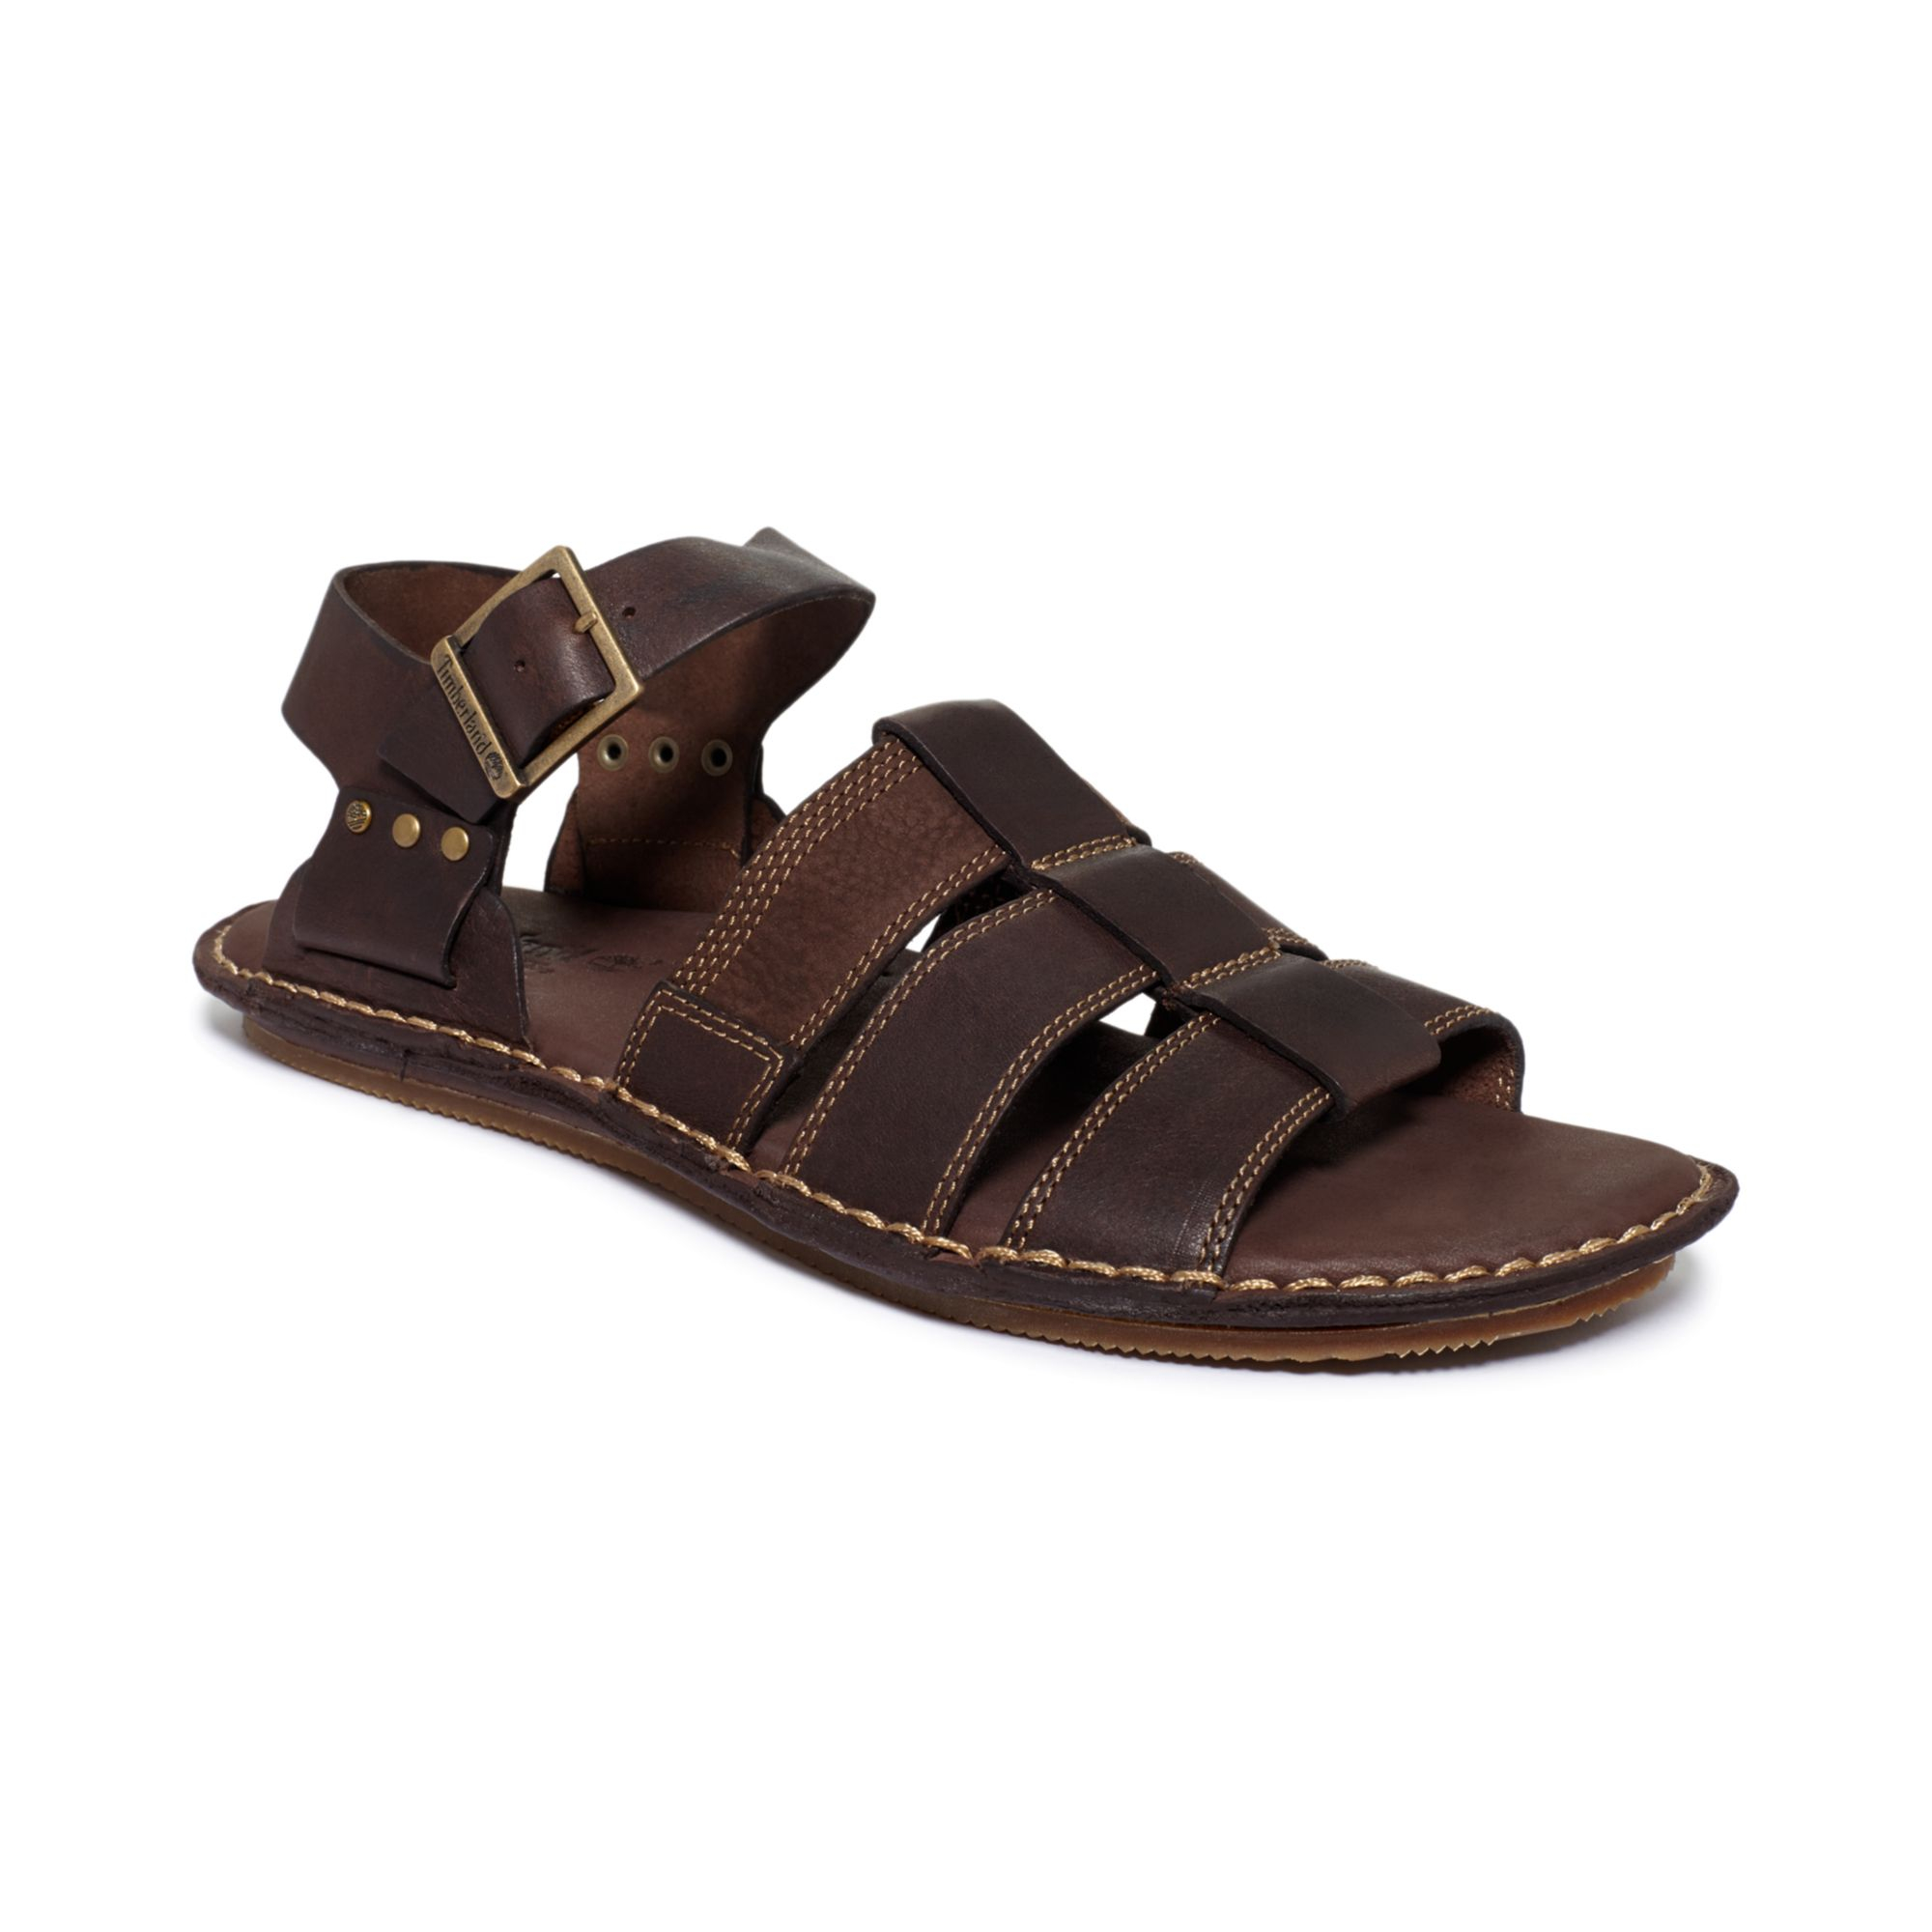 Lyst - Timberland Harbor Point Fisherman Sandals in Brown for Men